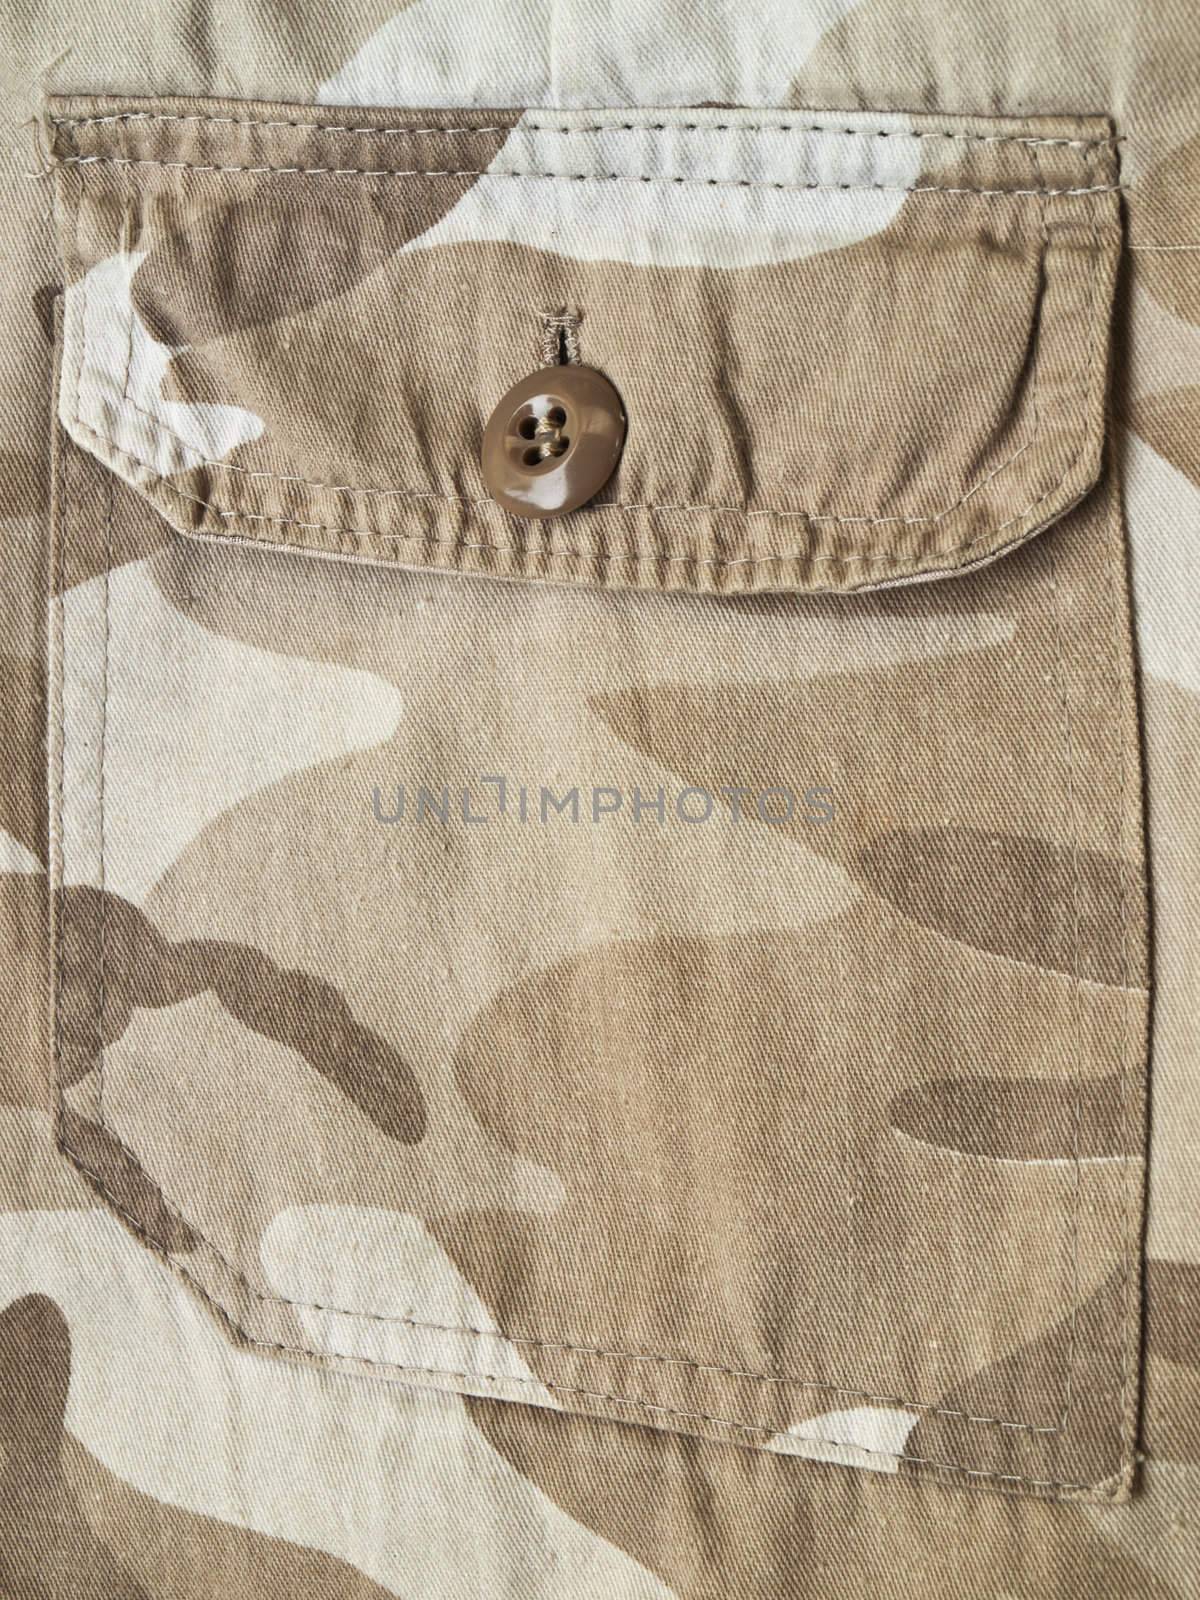 Pocket on a camouflage pants